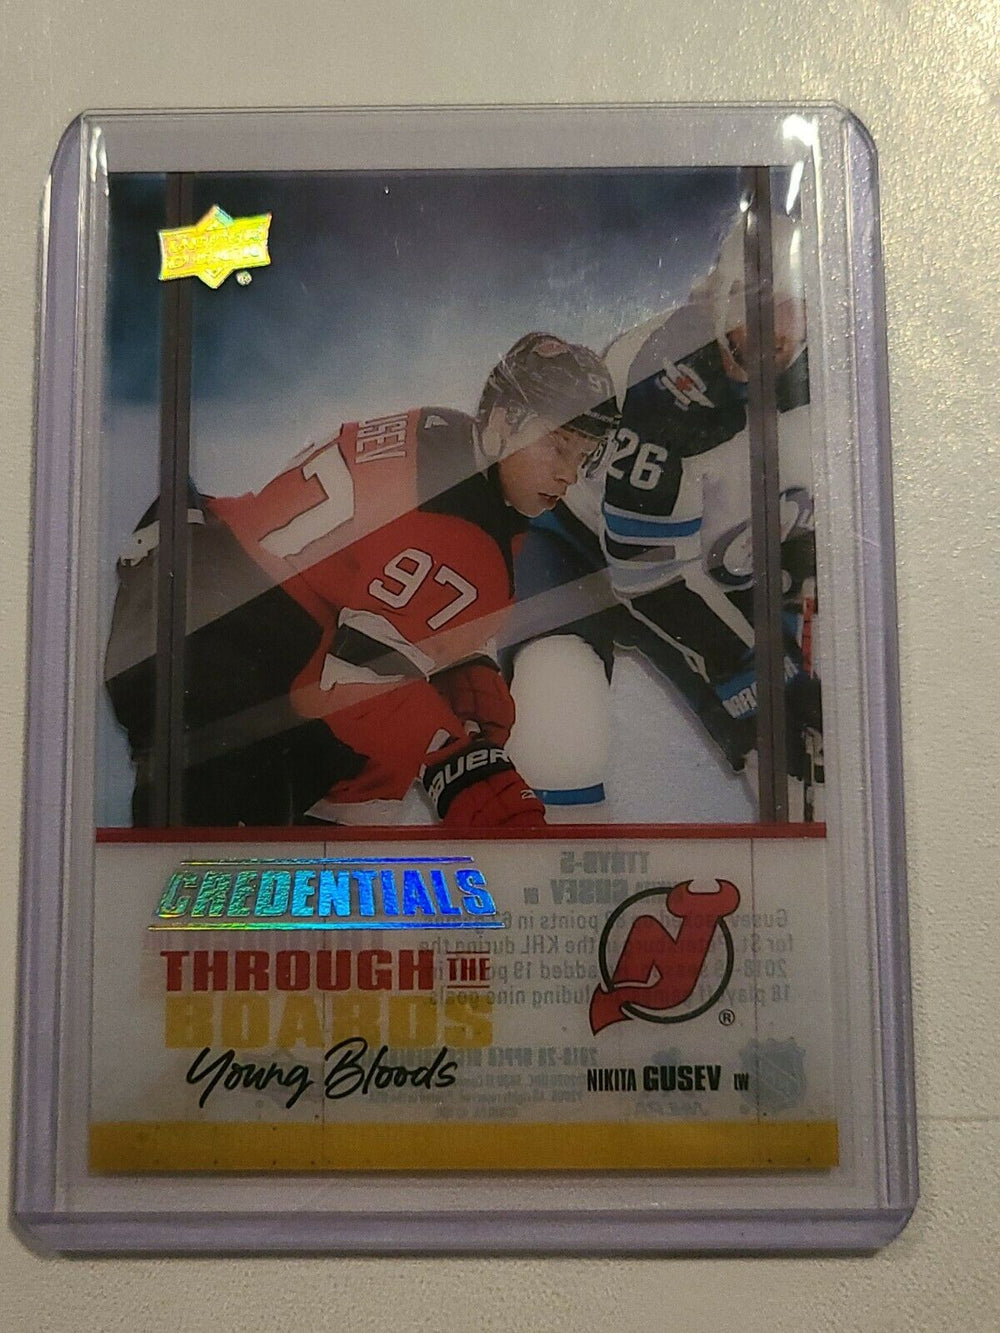 2019-20 Credentials Through The Boards #TTBYB-5 Nikita Gusev New Jersey Devils